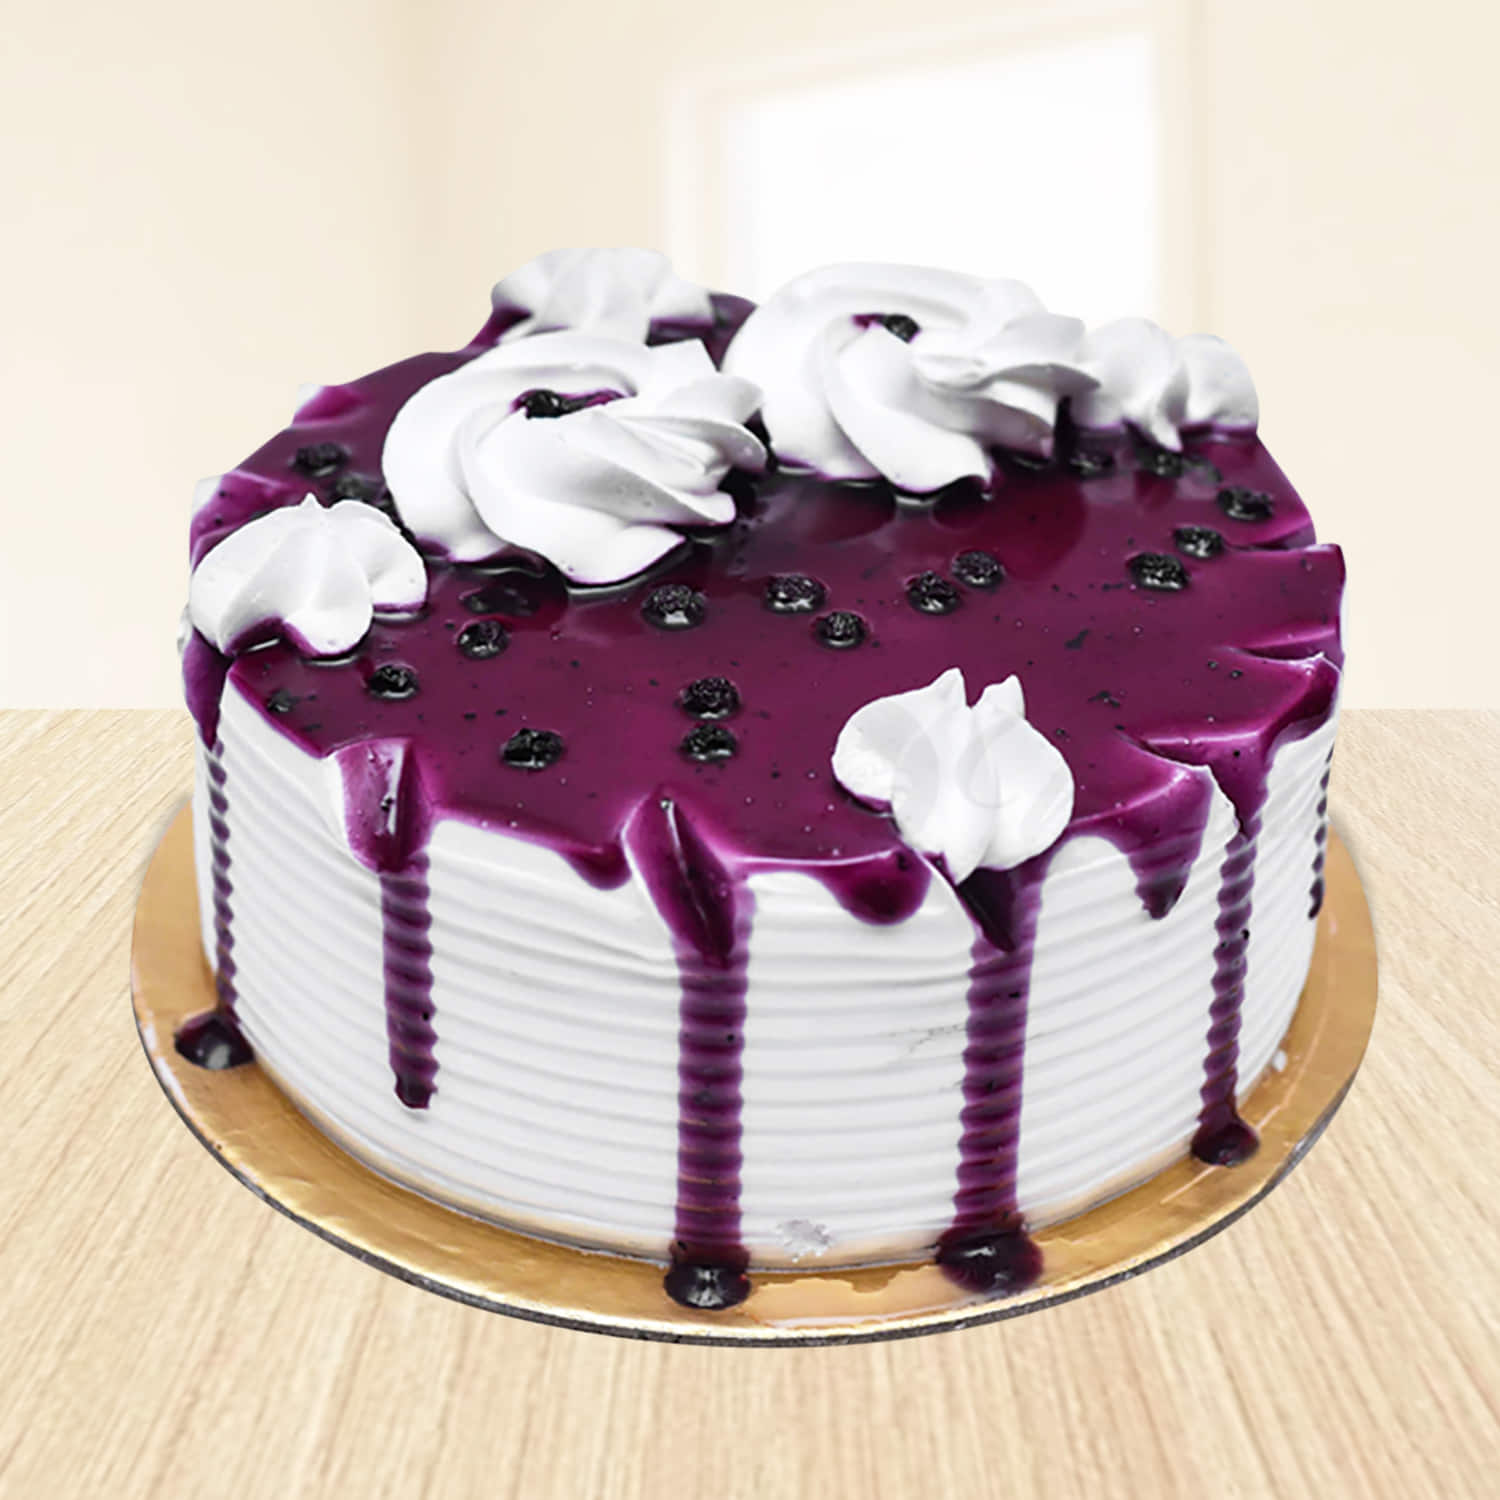 Buy Blueberry Cake | Eggless Blueberry Cake | Free Delivery